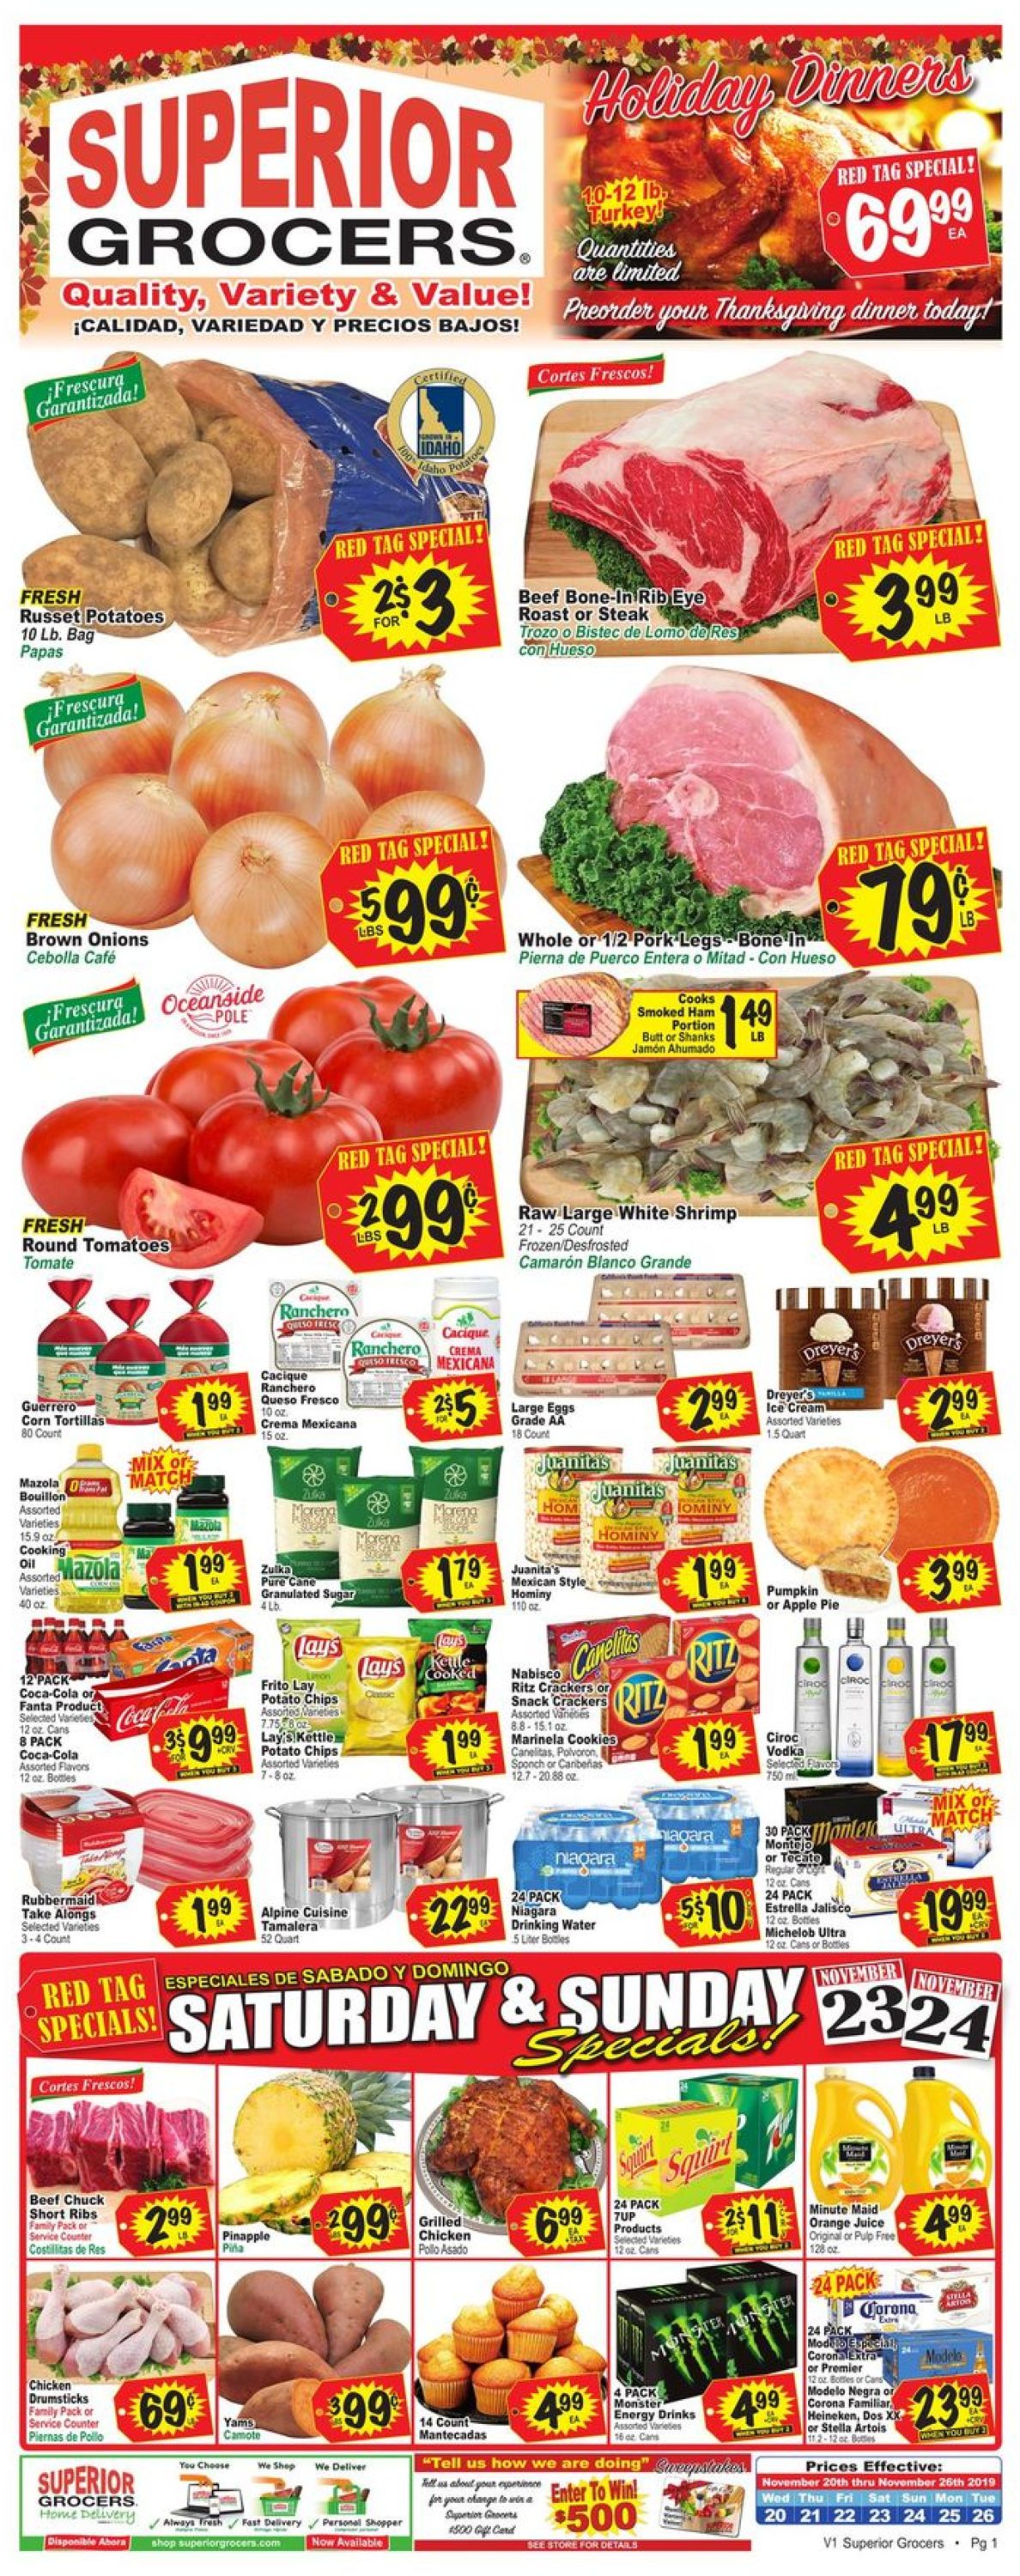 Superior Grocers Current weekly ad 11/20 - 11/26/2019 - frequent-ads.com